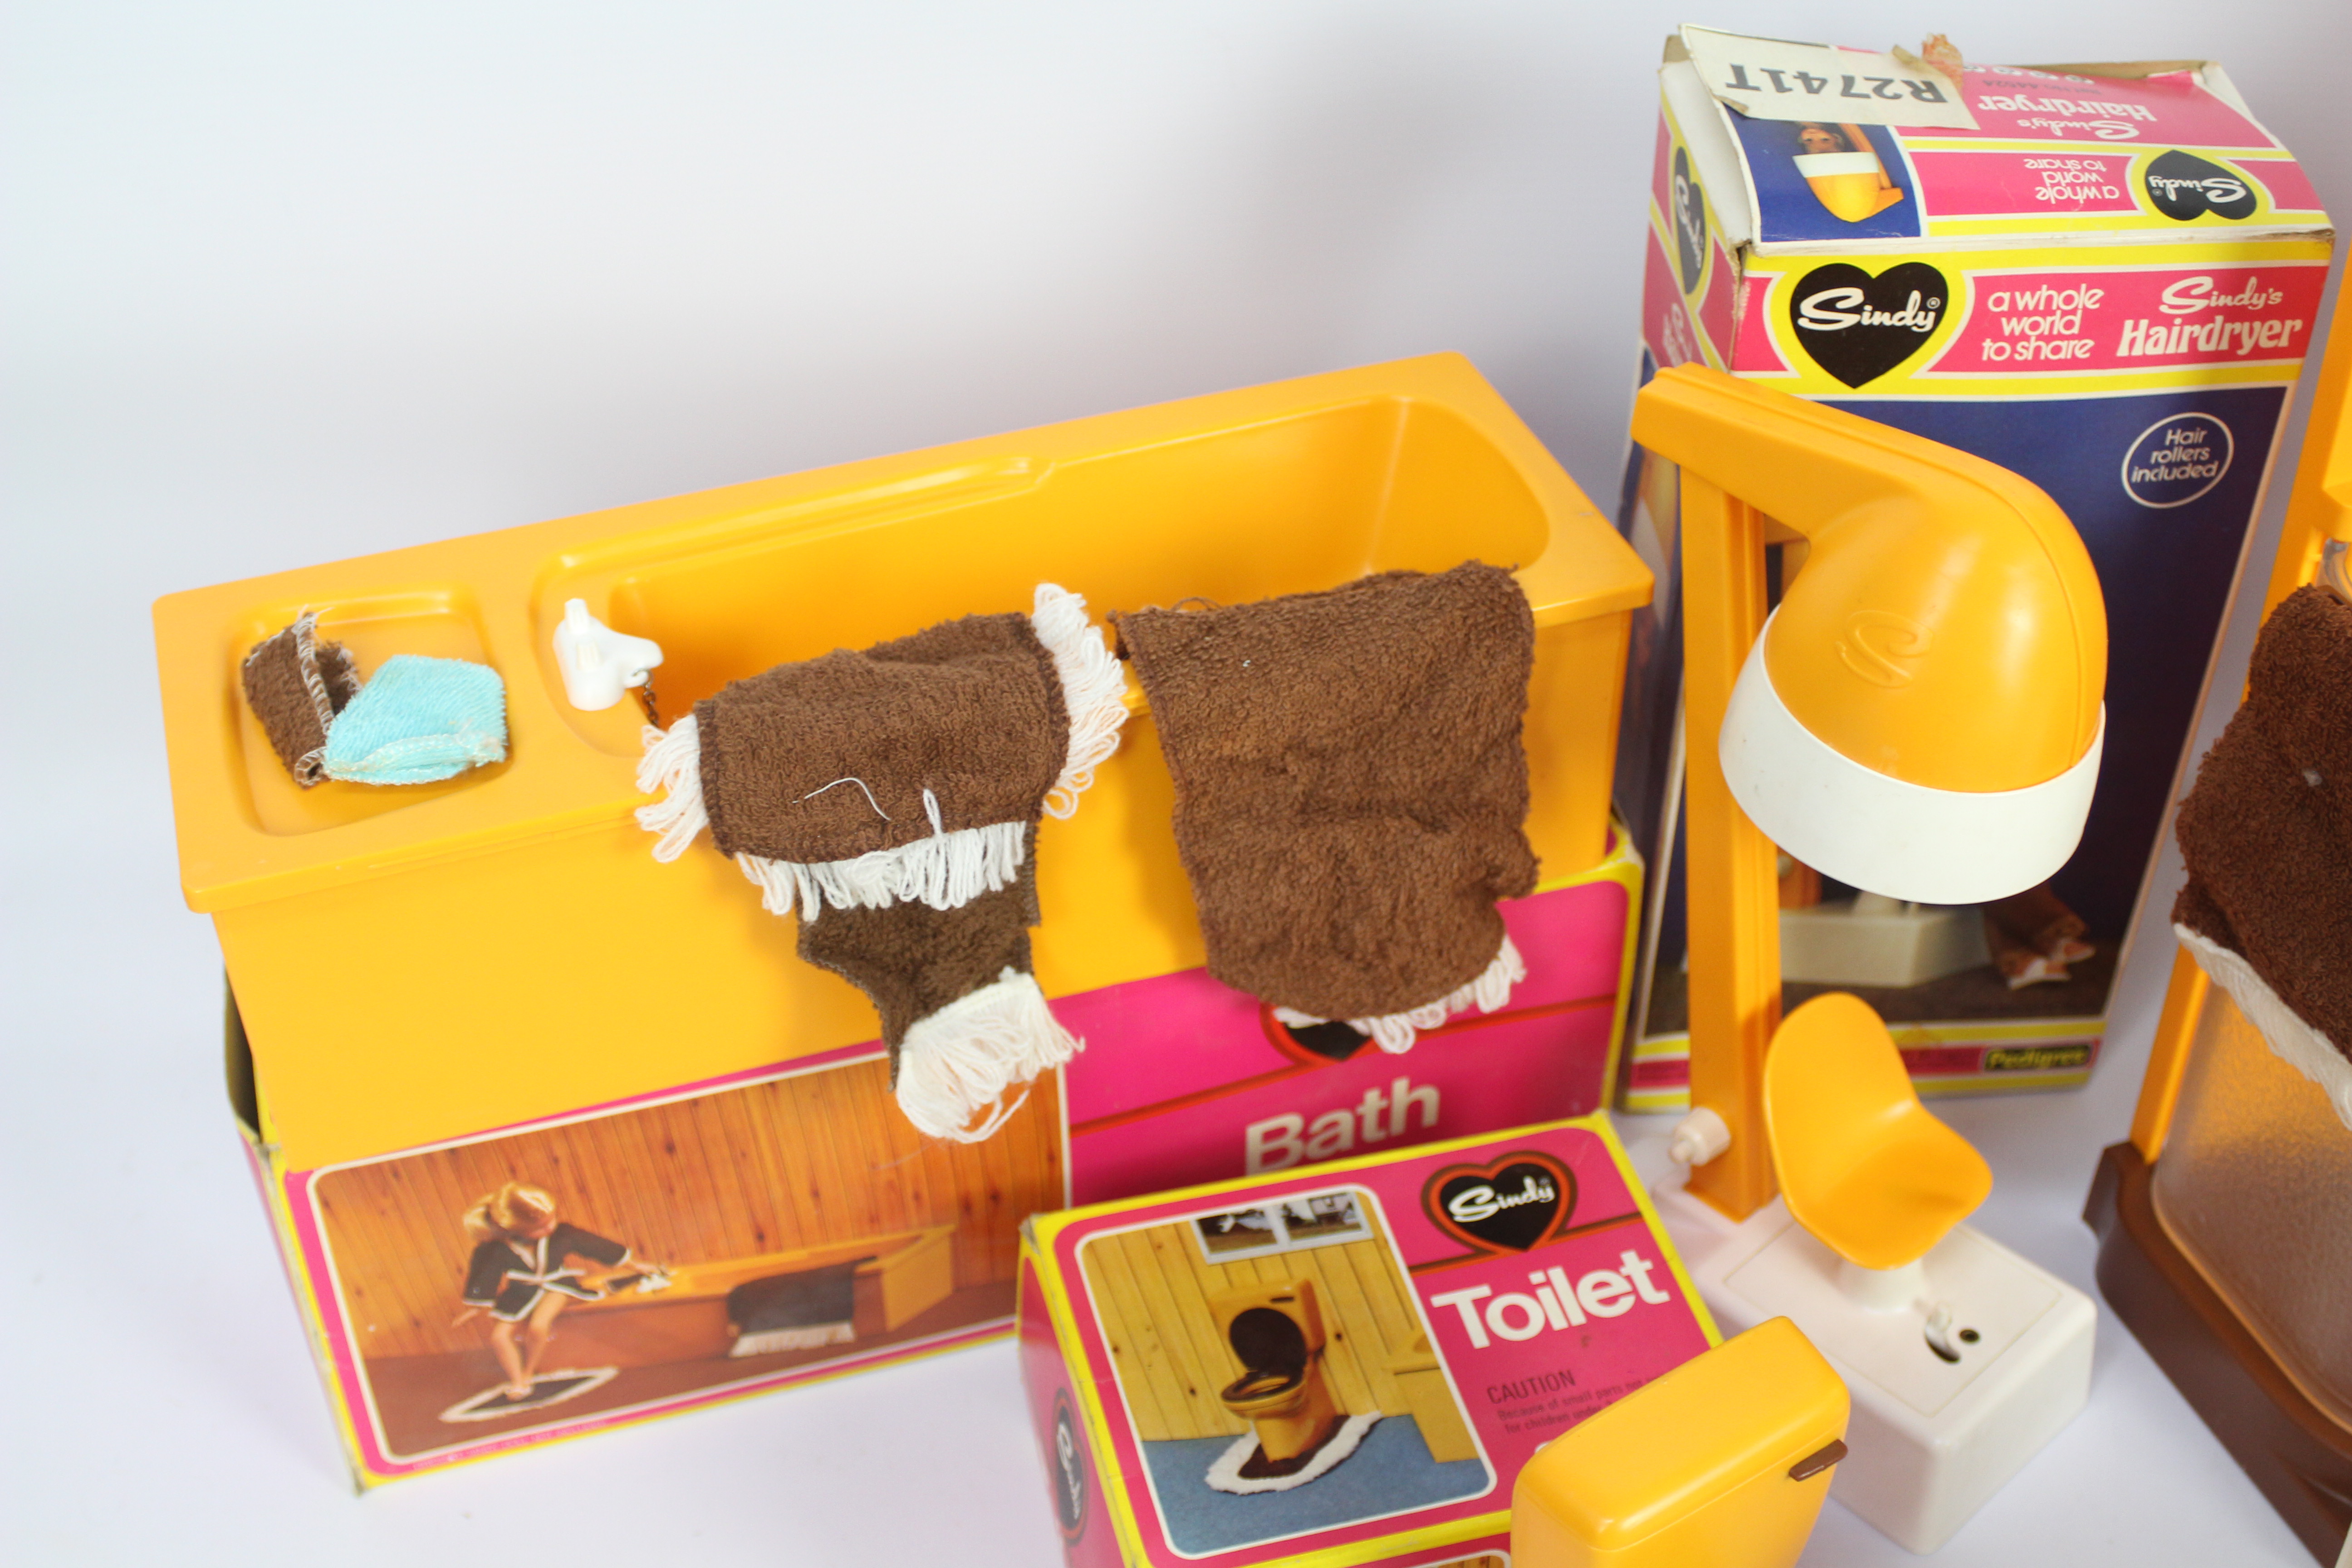 Pedigree - Sindy - A collection of Sindy bathroom items including boxed Shower, boxed Toilet, - Image 2 of 4